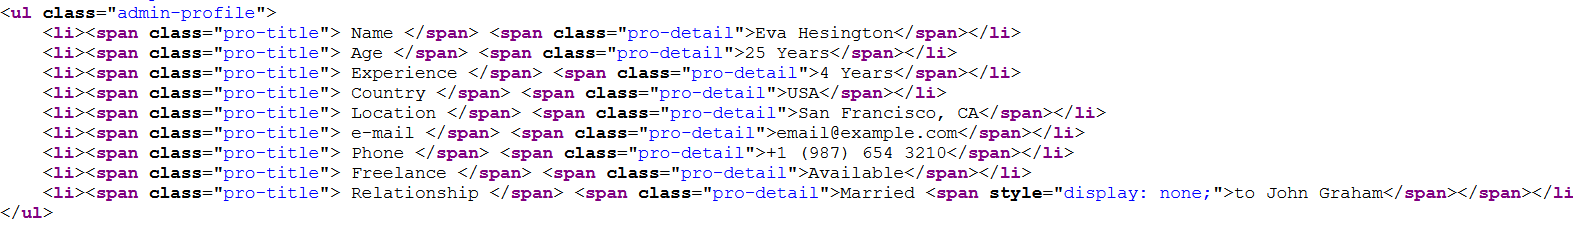 Page source showing that Eva Hesington's husband's name was hidden